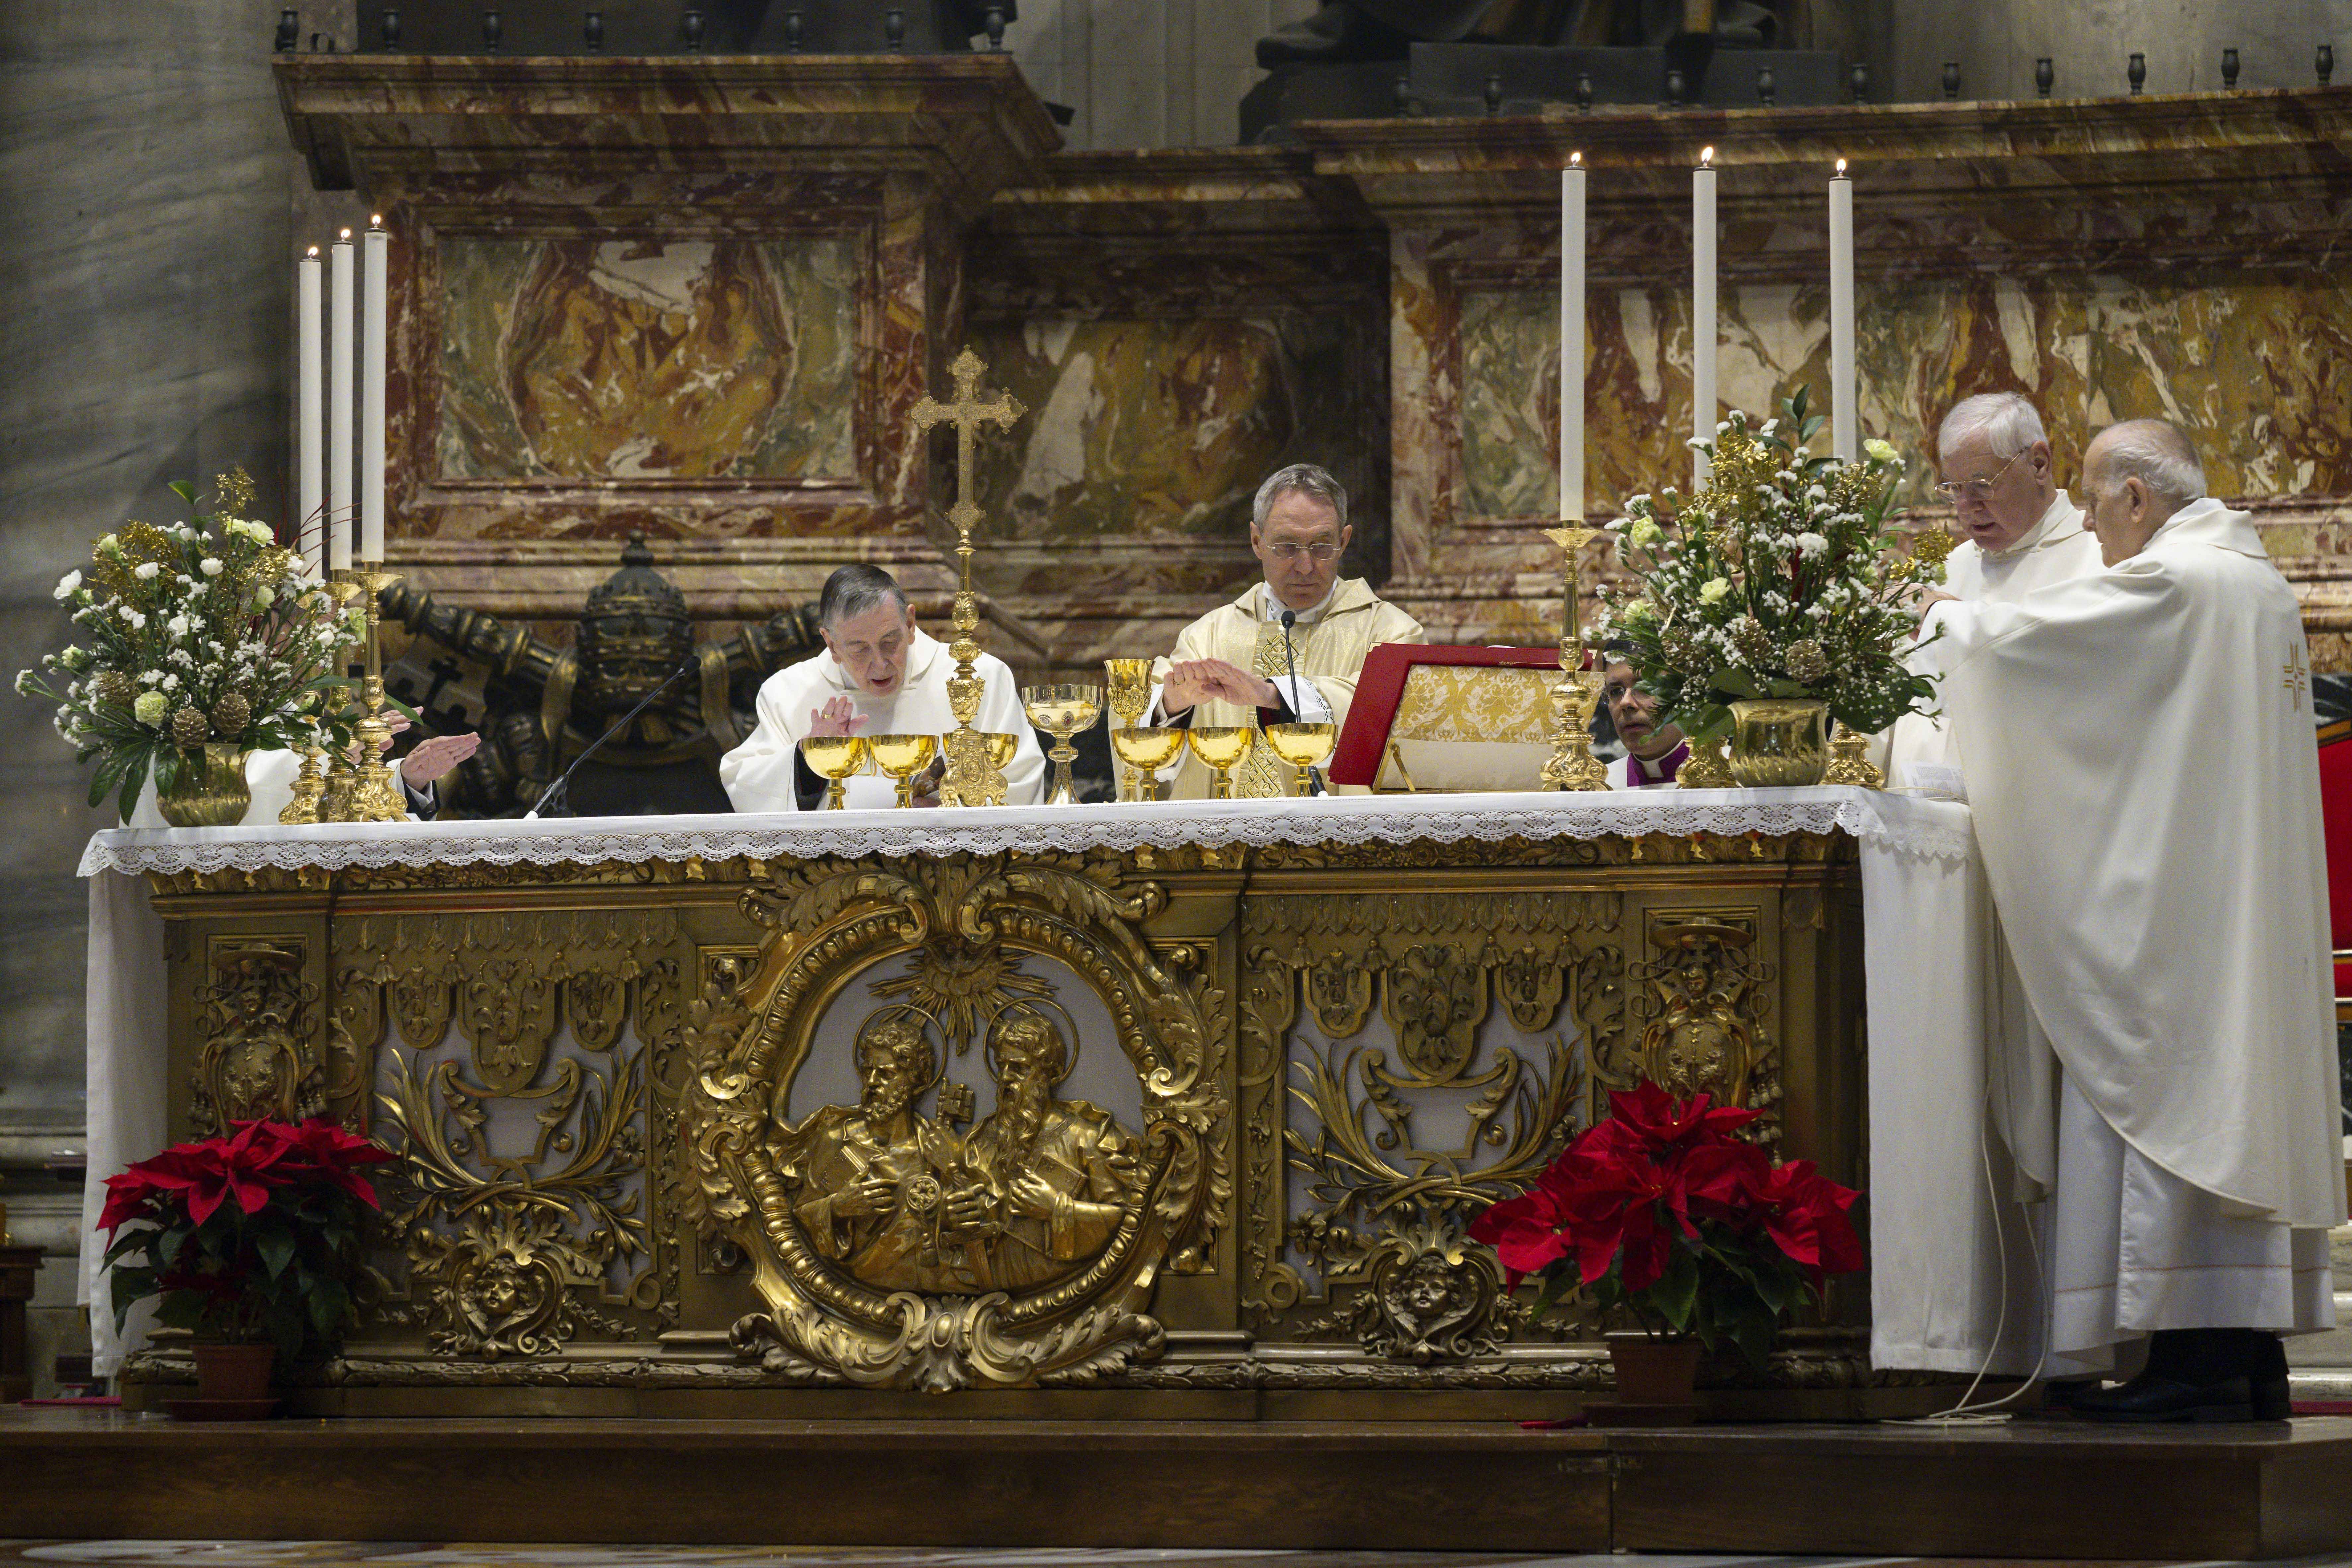 Conference on anniversary of Benedict’s death focuses on legacy defined by love of Christ